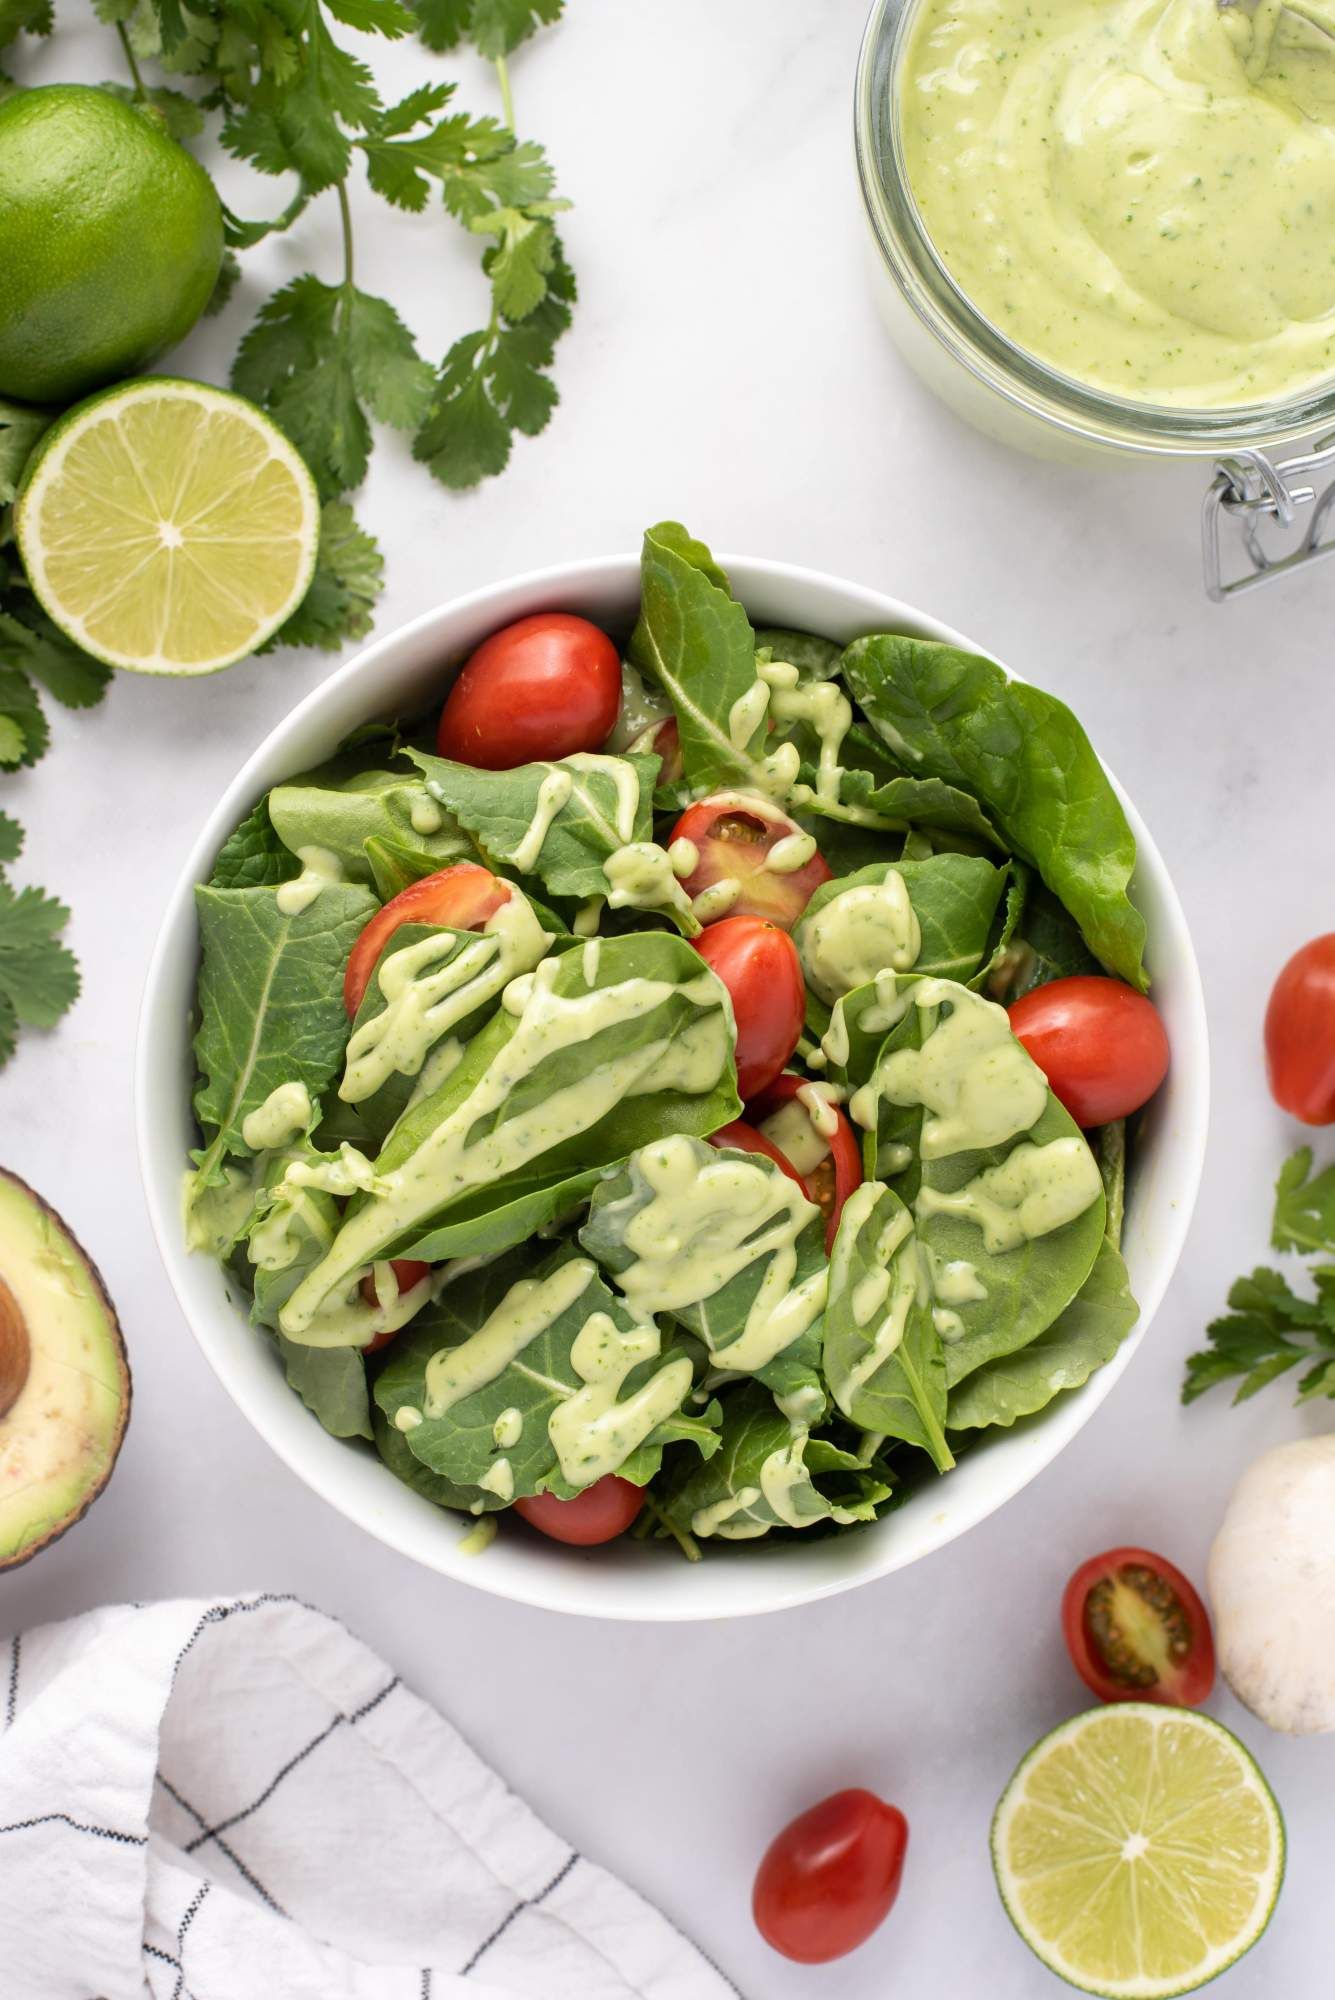 Green salad with tomatoes drizzled with creamy avocado dressing with cilantro and avocado on the side.